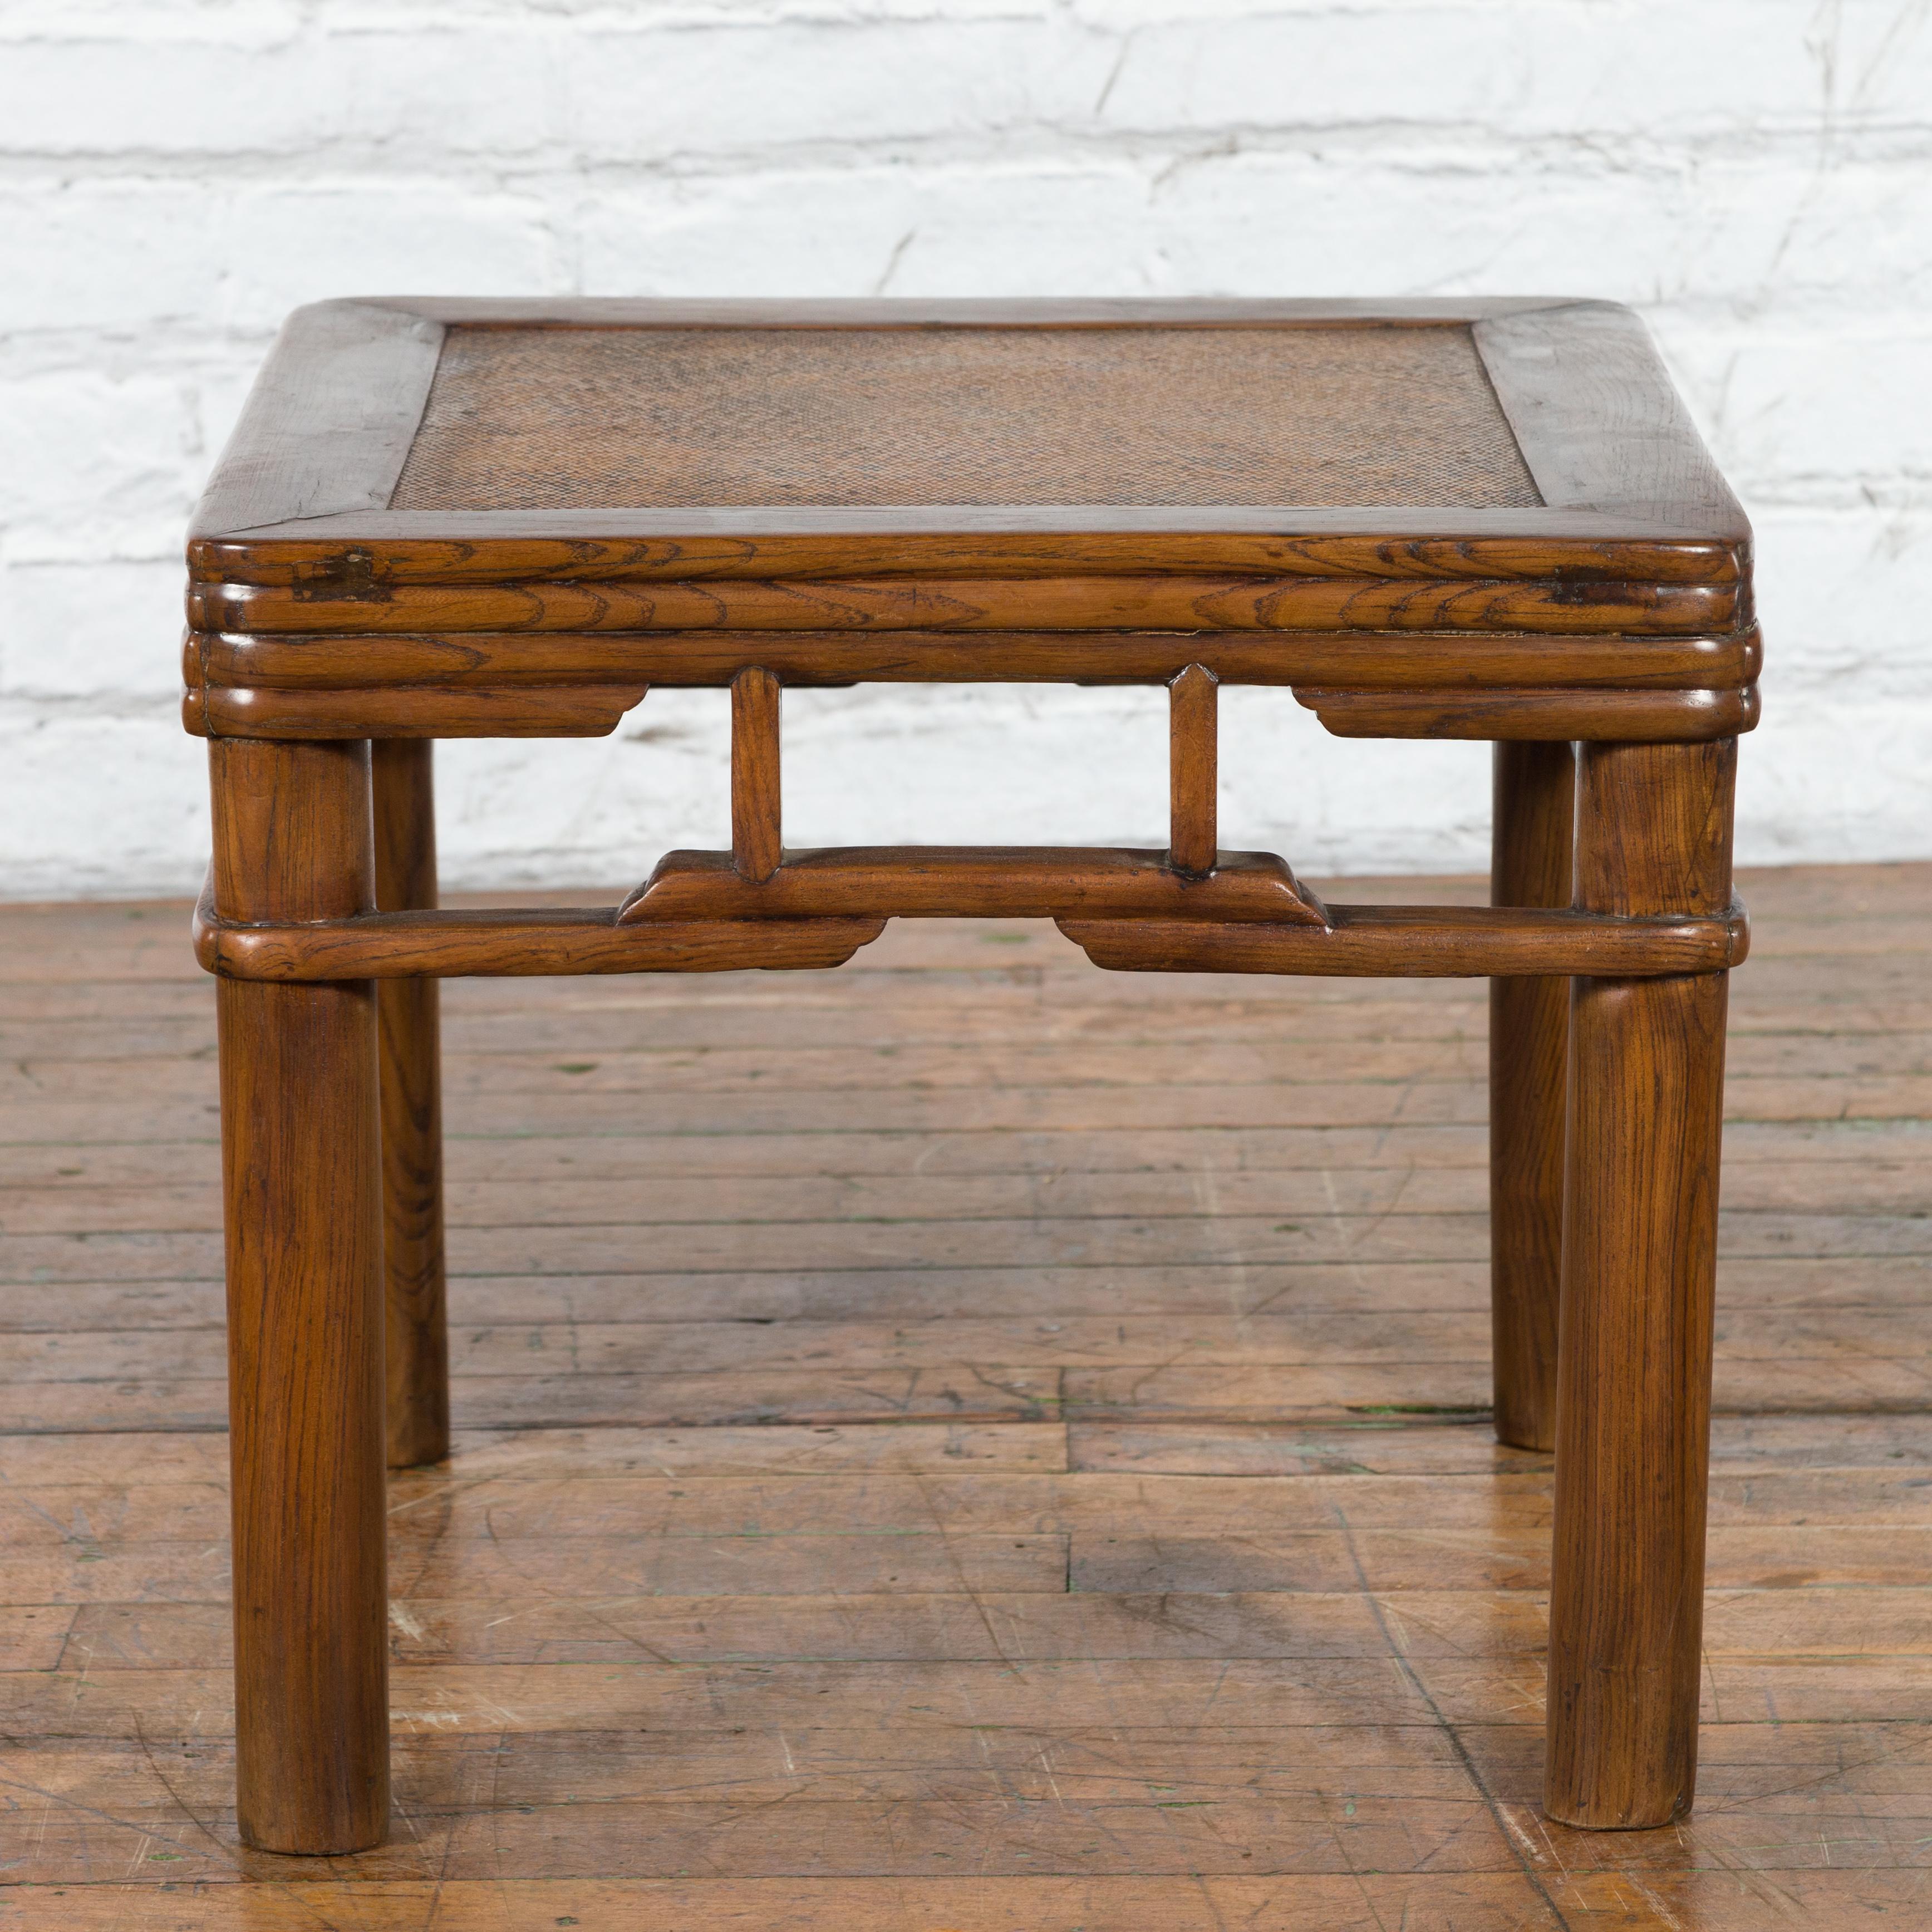 Chinese Qing Dynasty Early 20th Century Elmwood Side Table with Woven Rattan Top For Sale 3